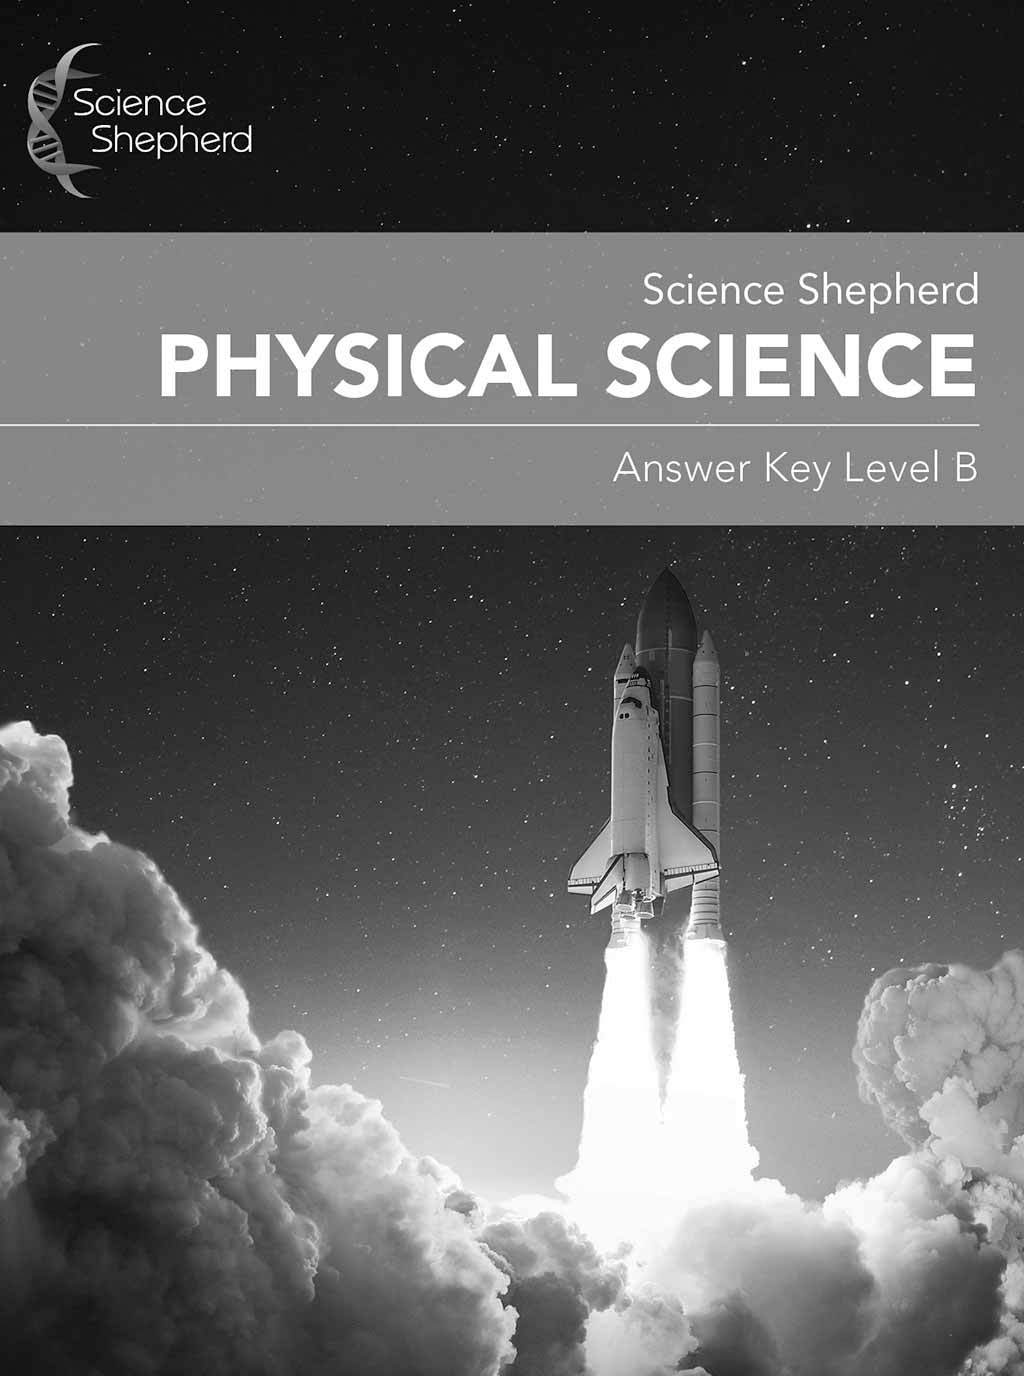 Physical Science 4th to 6th grade homeschool science answer key Level B cover of a shuttle launch